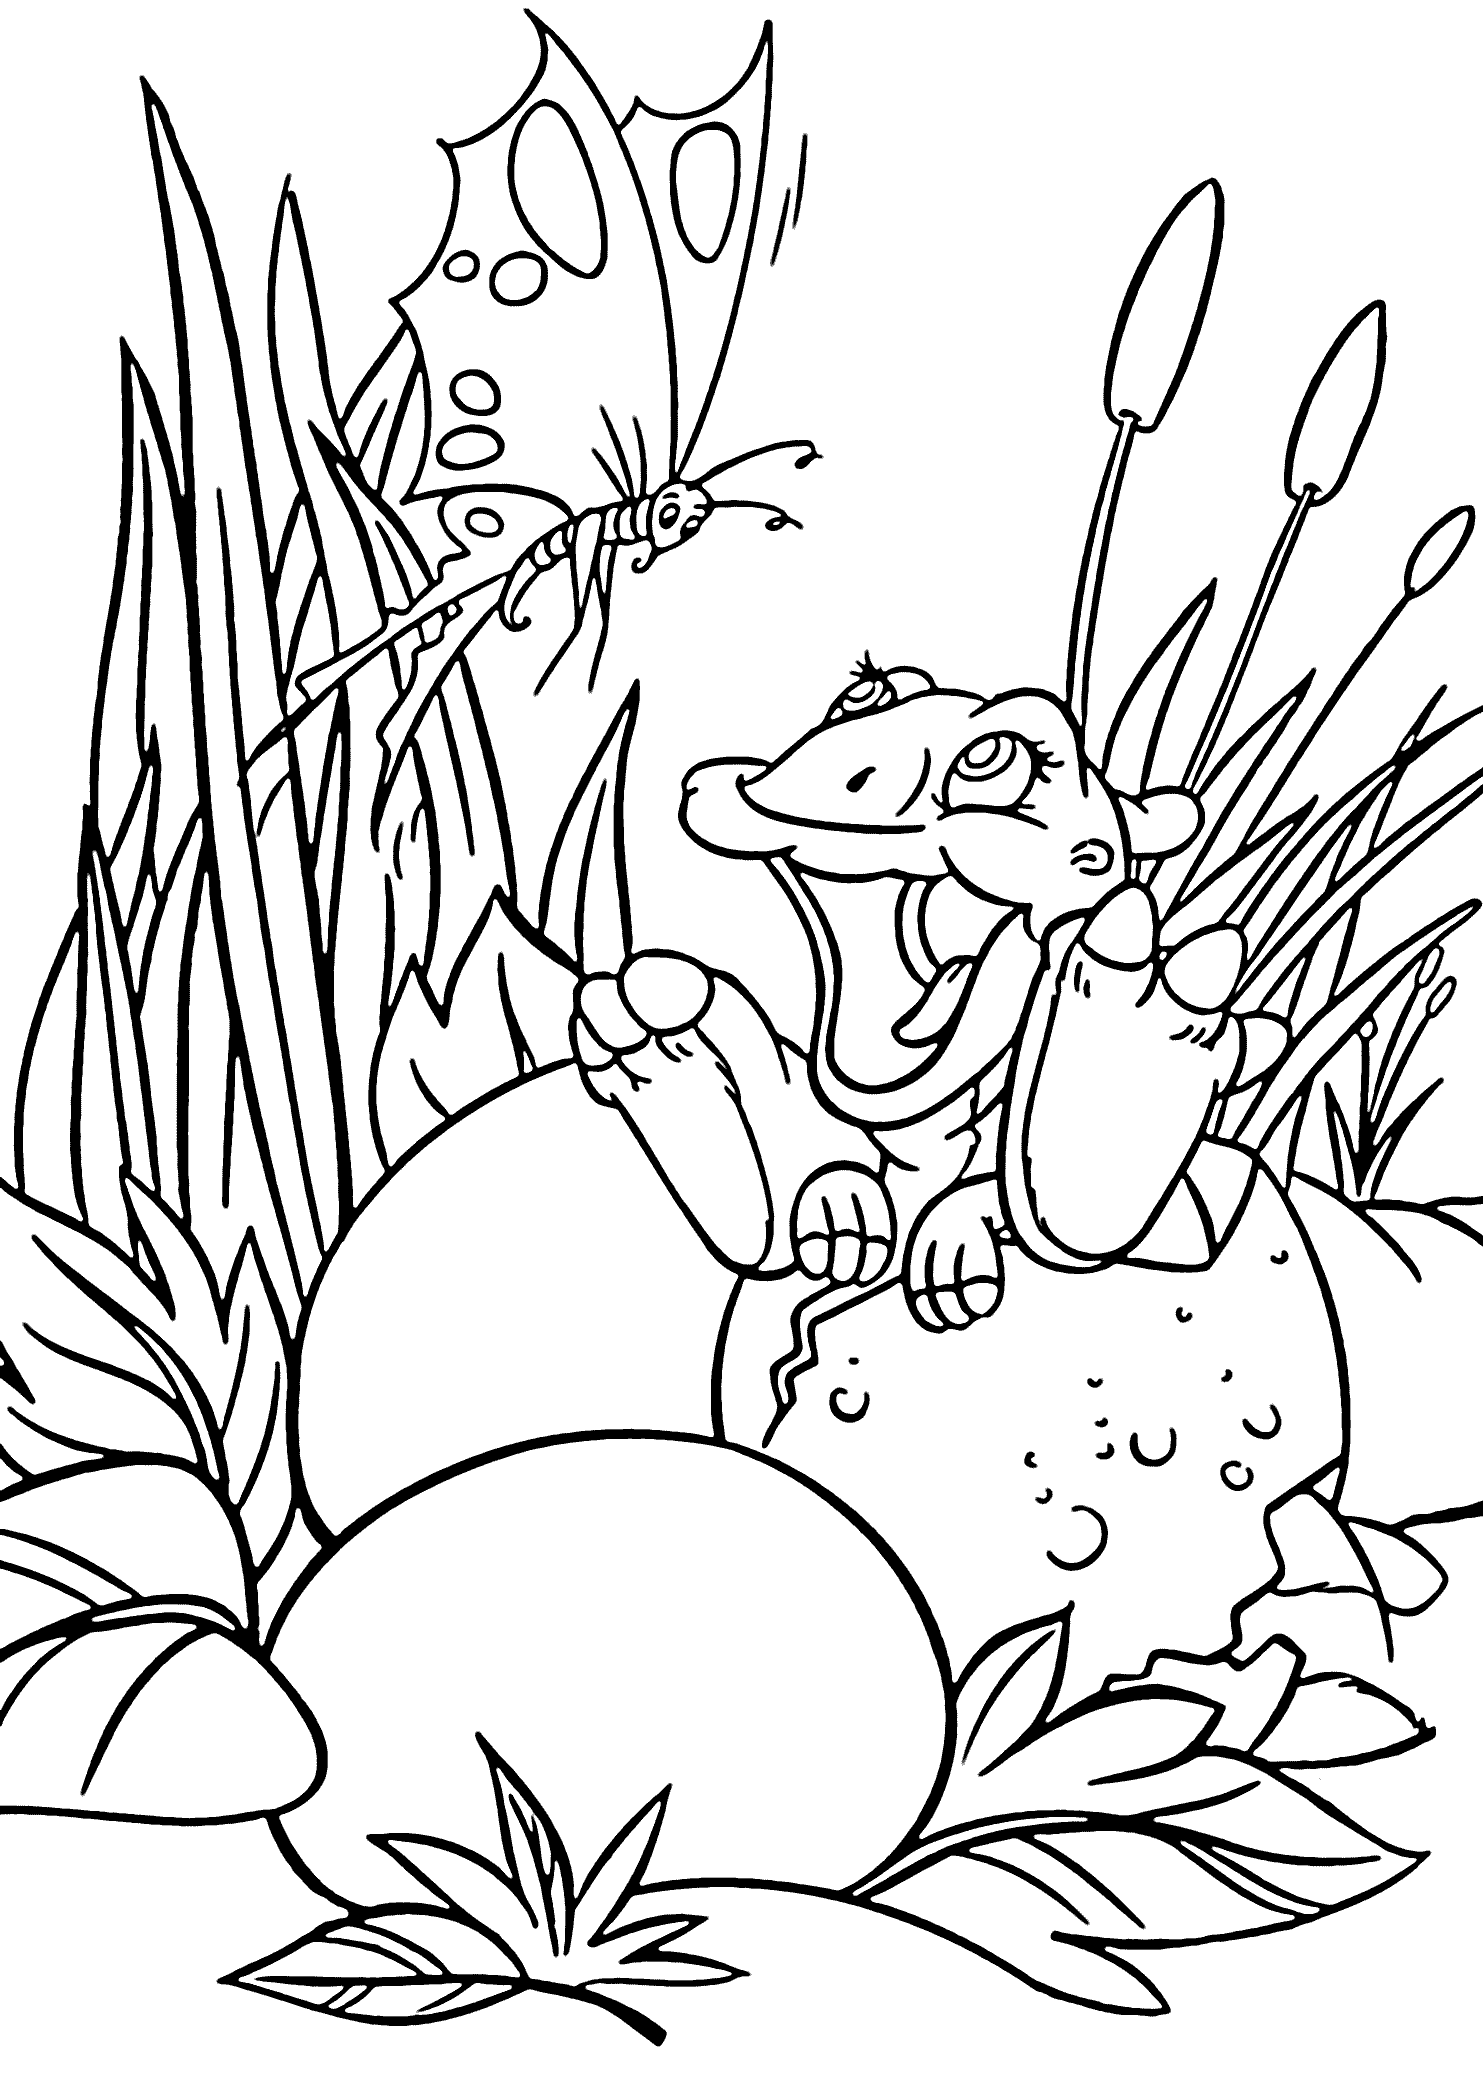 Ducky dino from land before time coloring pages for kids printable free